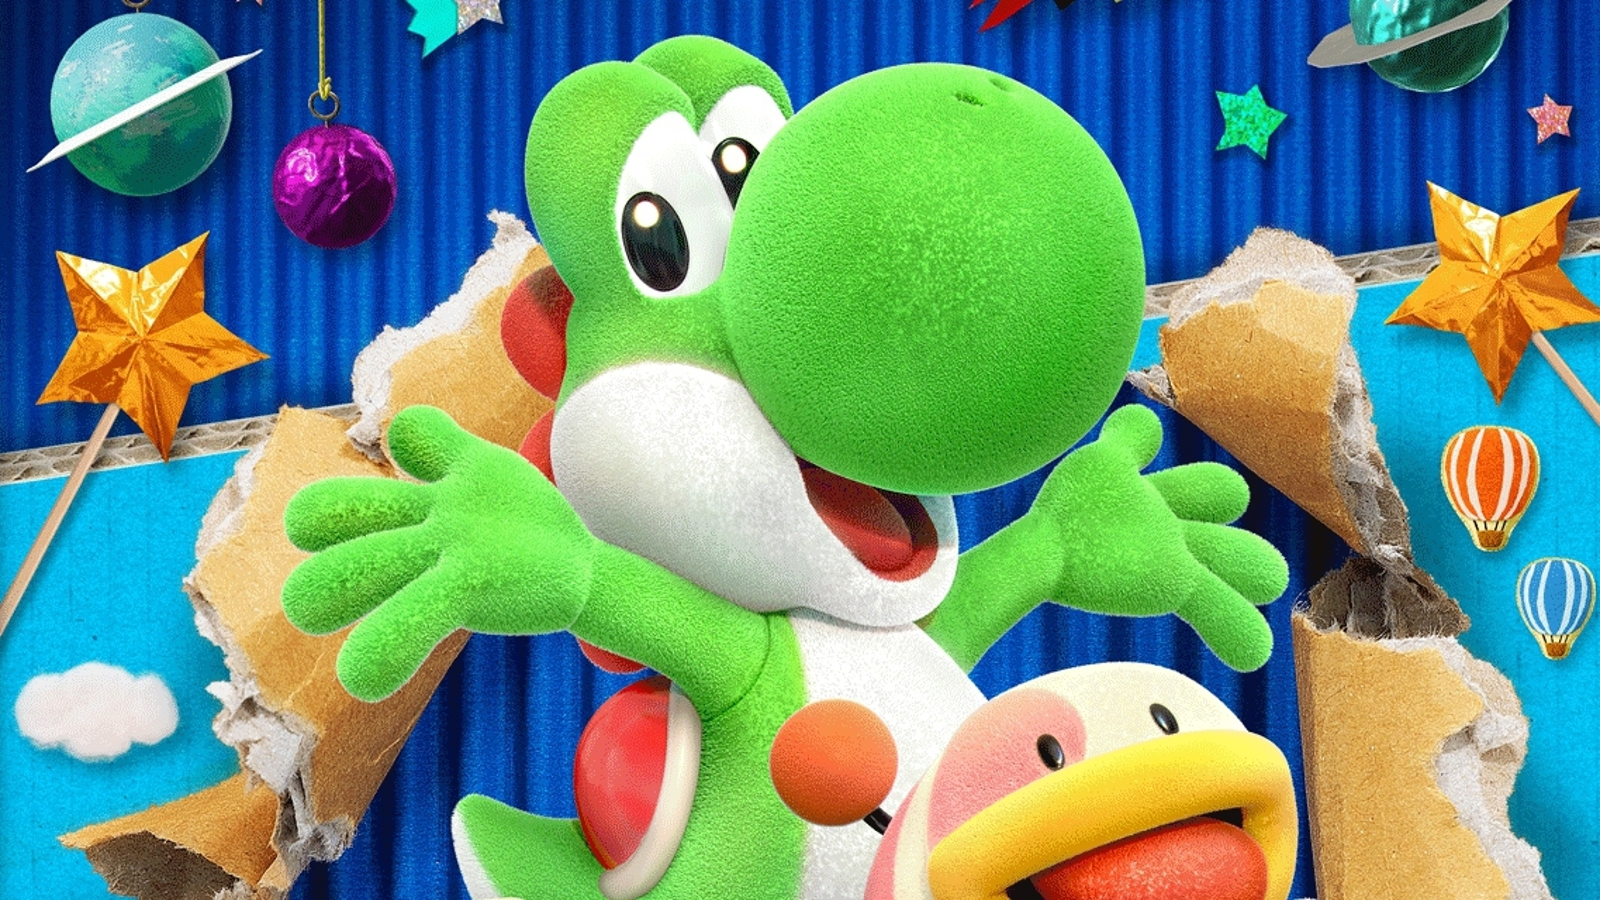 Nintendo Announces New Yoshi Title From The Makers Of Kirby's Epic